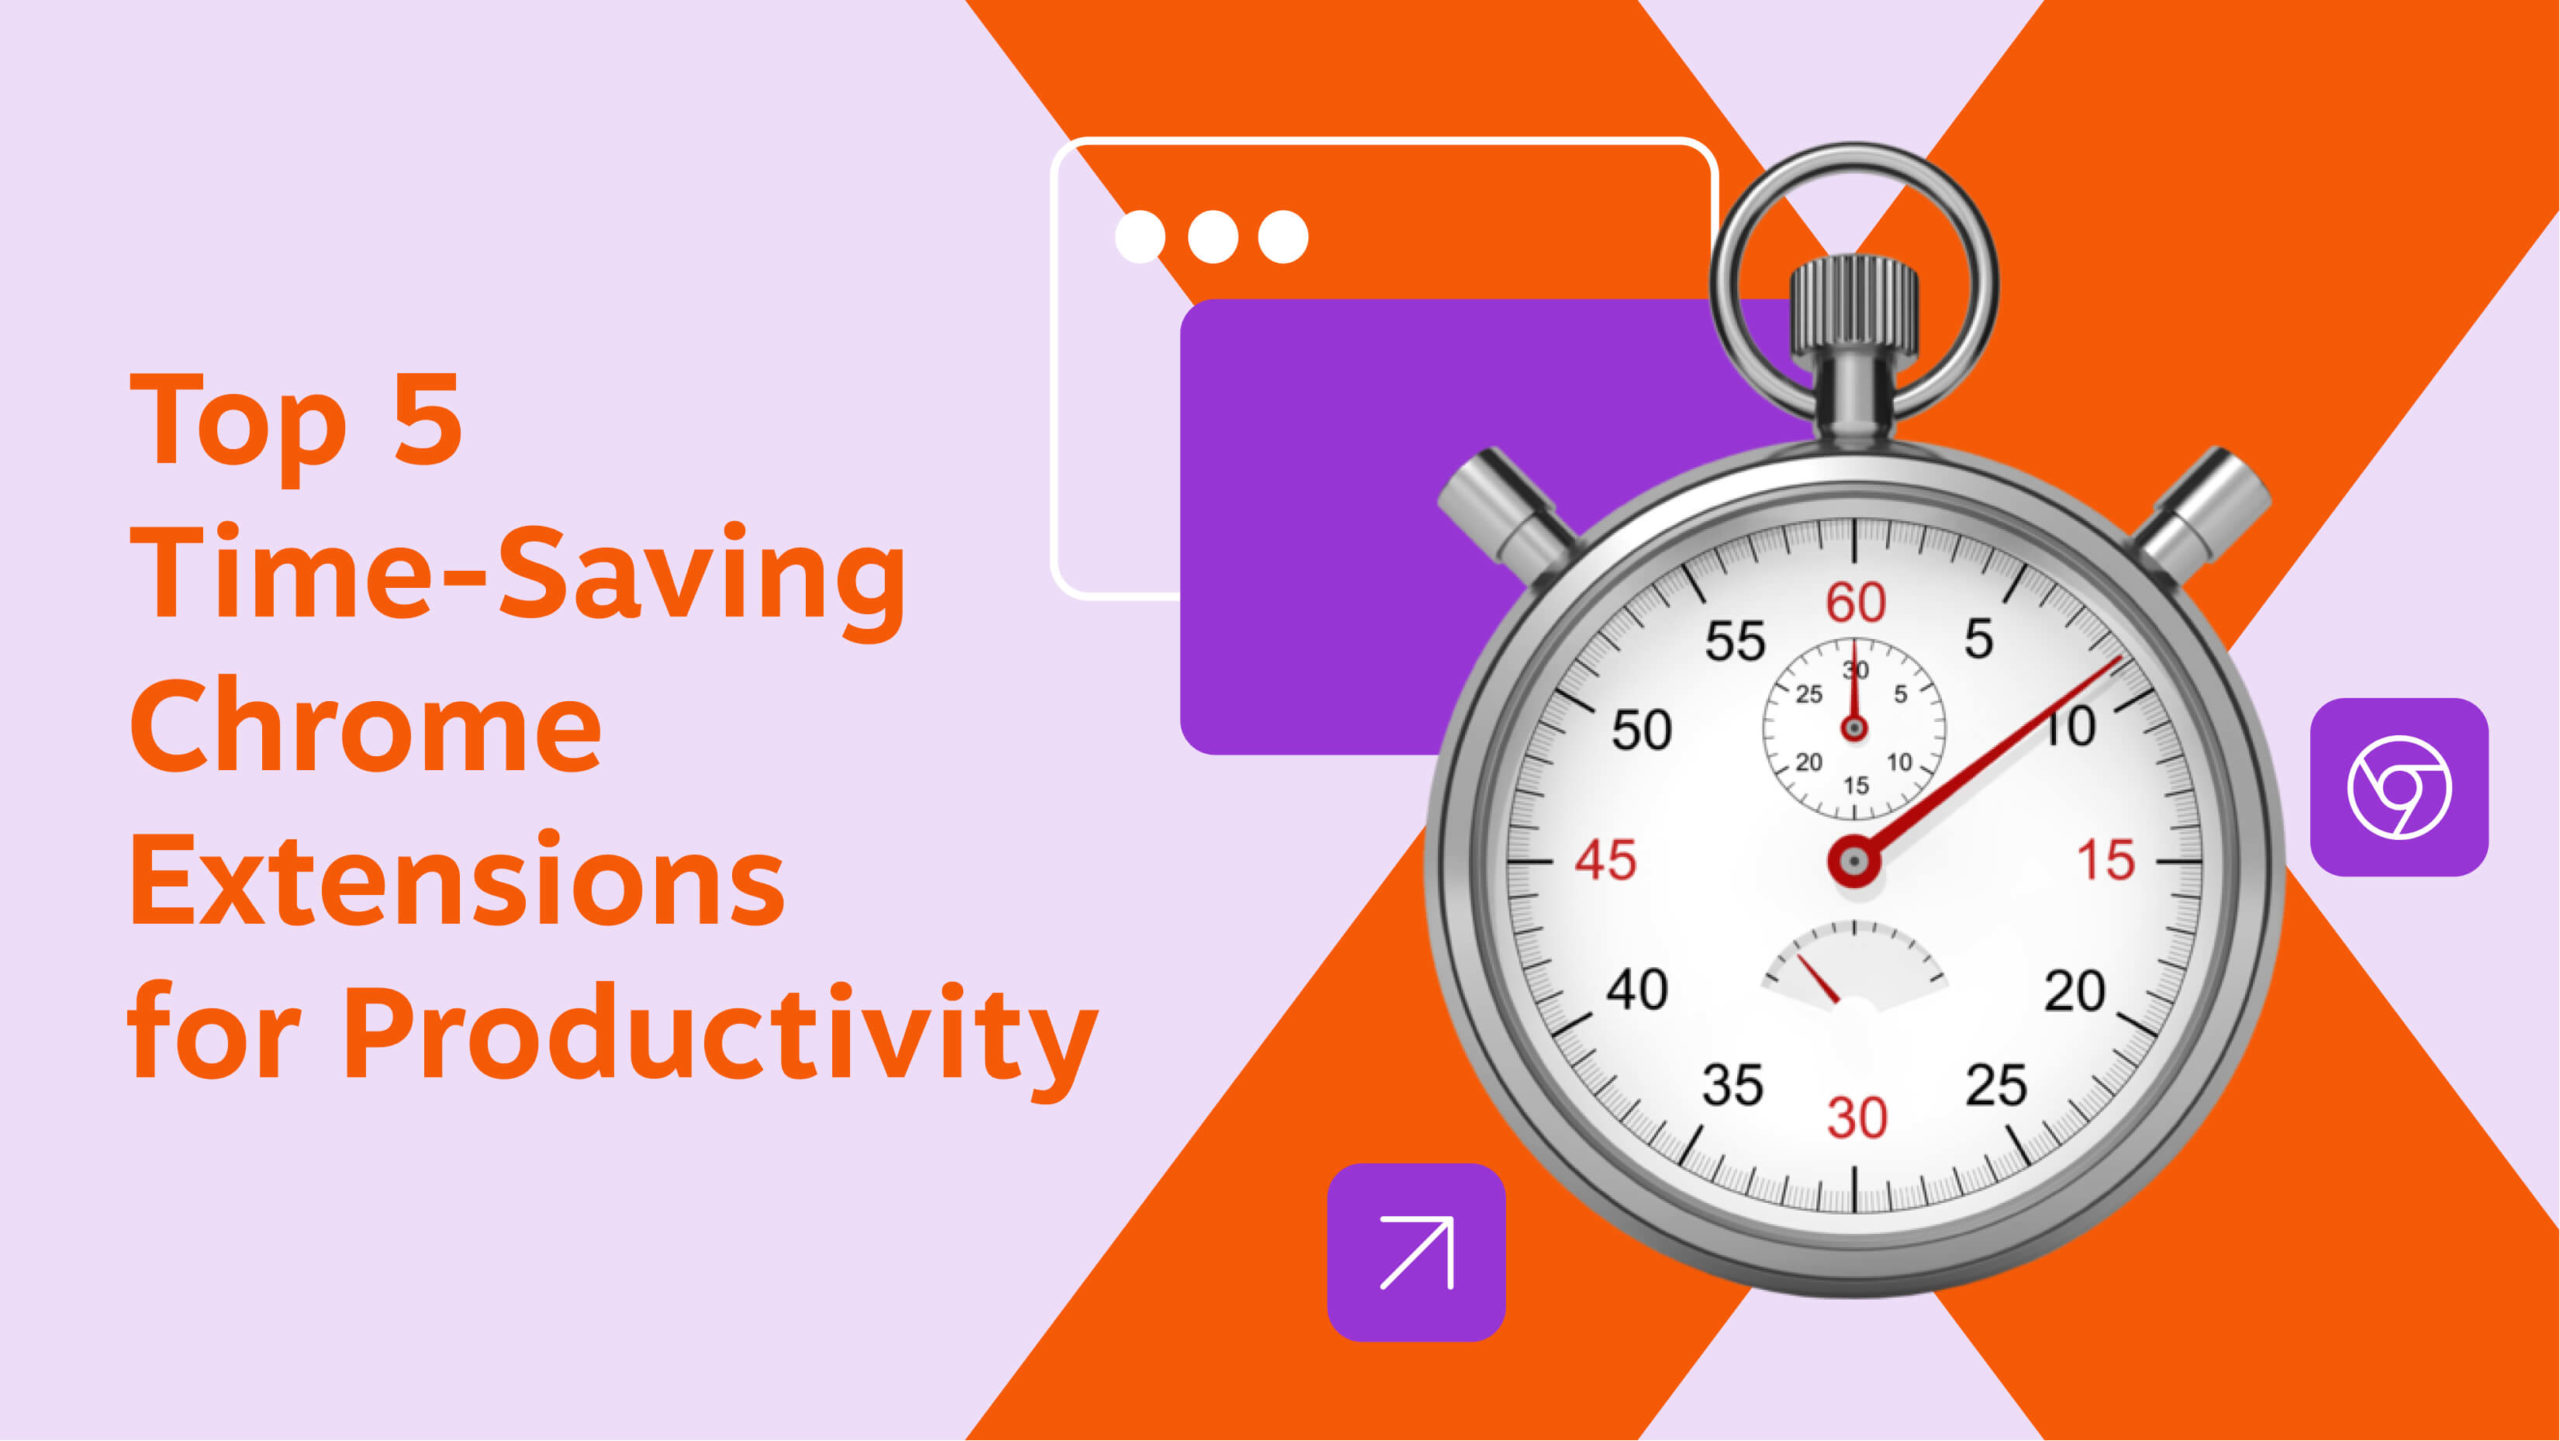 5 Safari Extensions to Be More Productive - Nextiva Blog